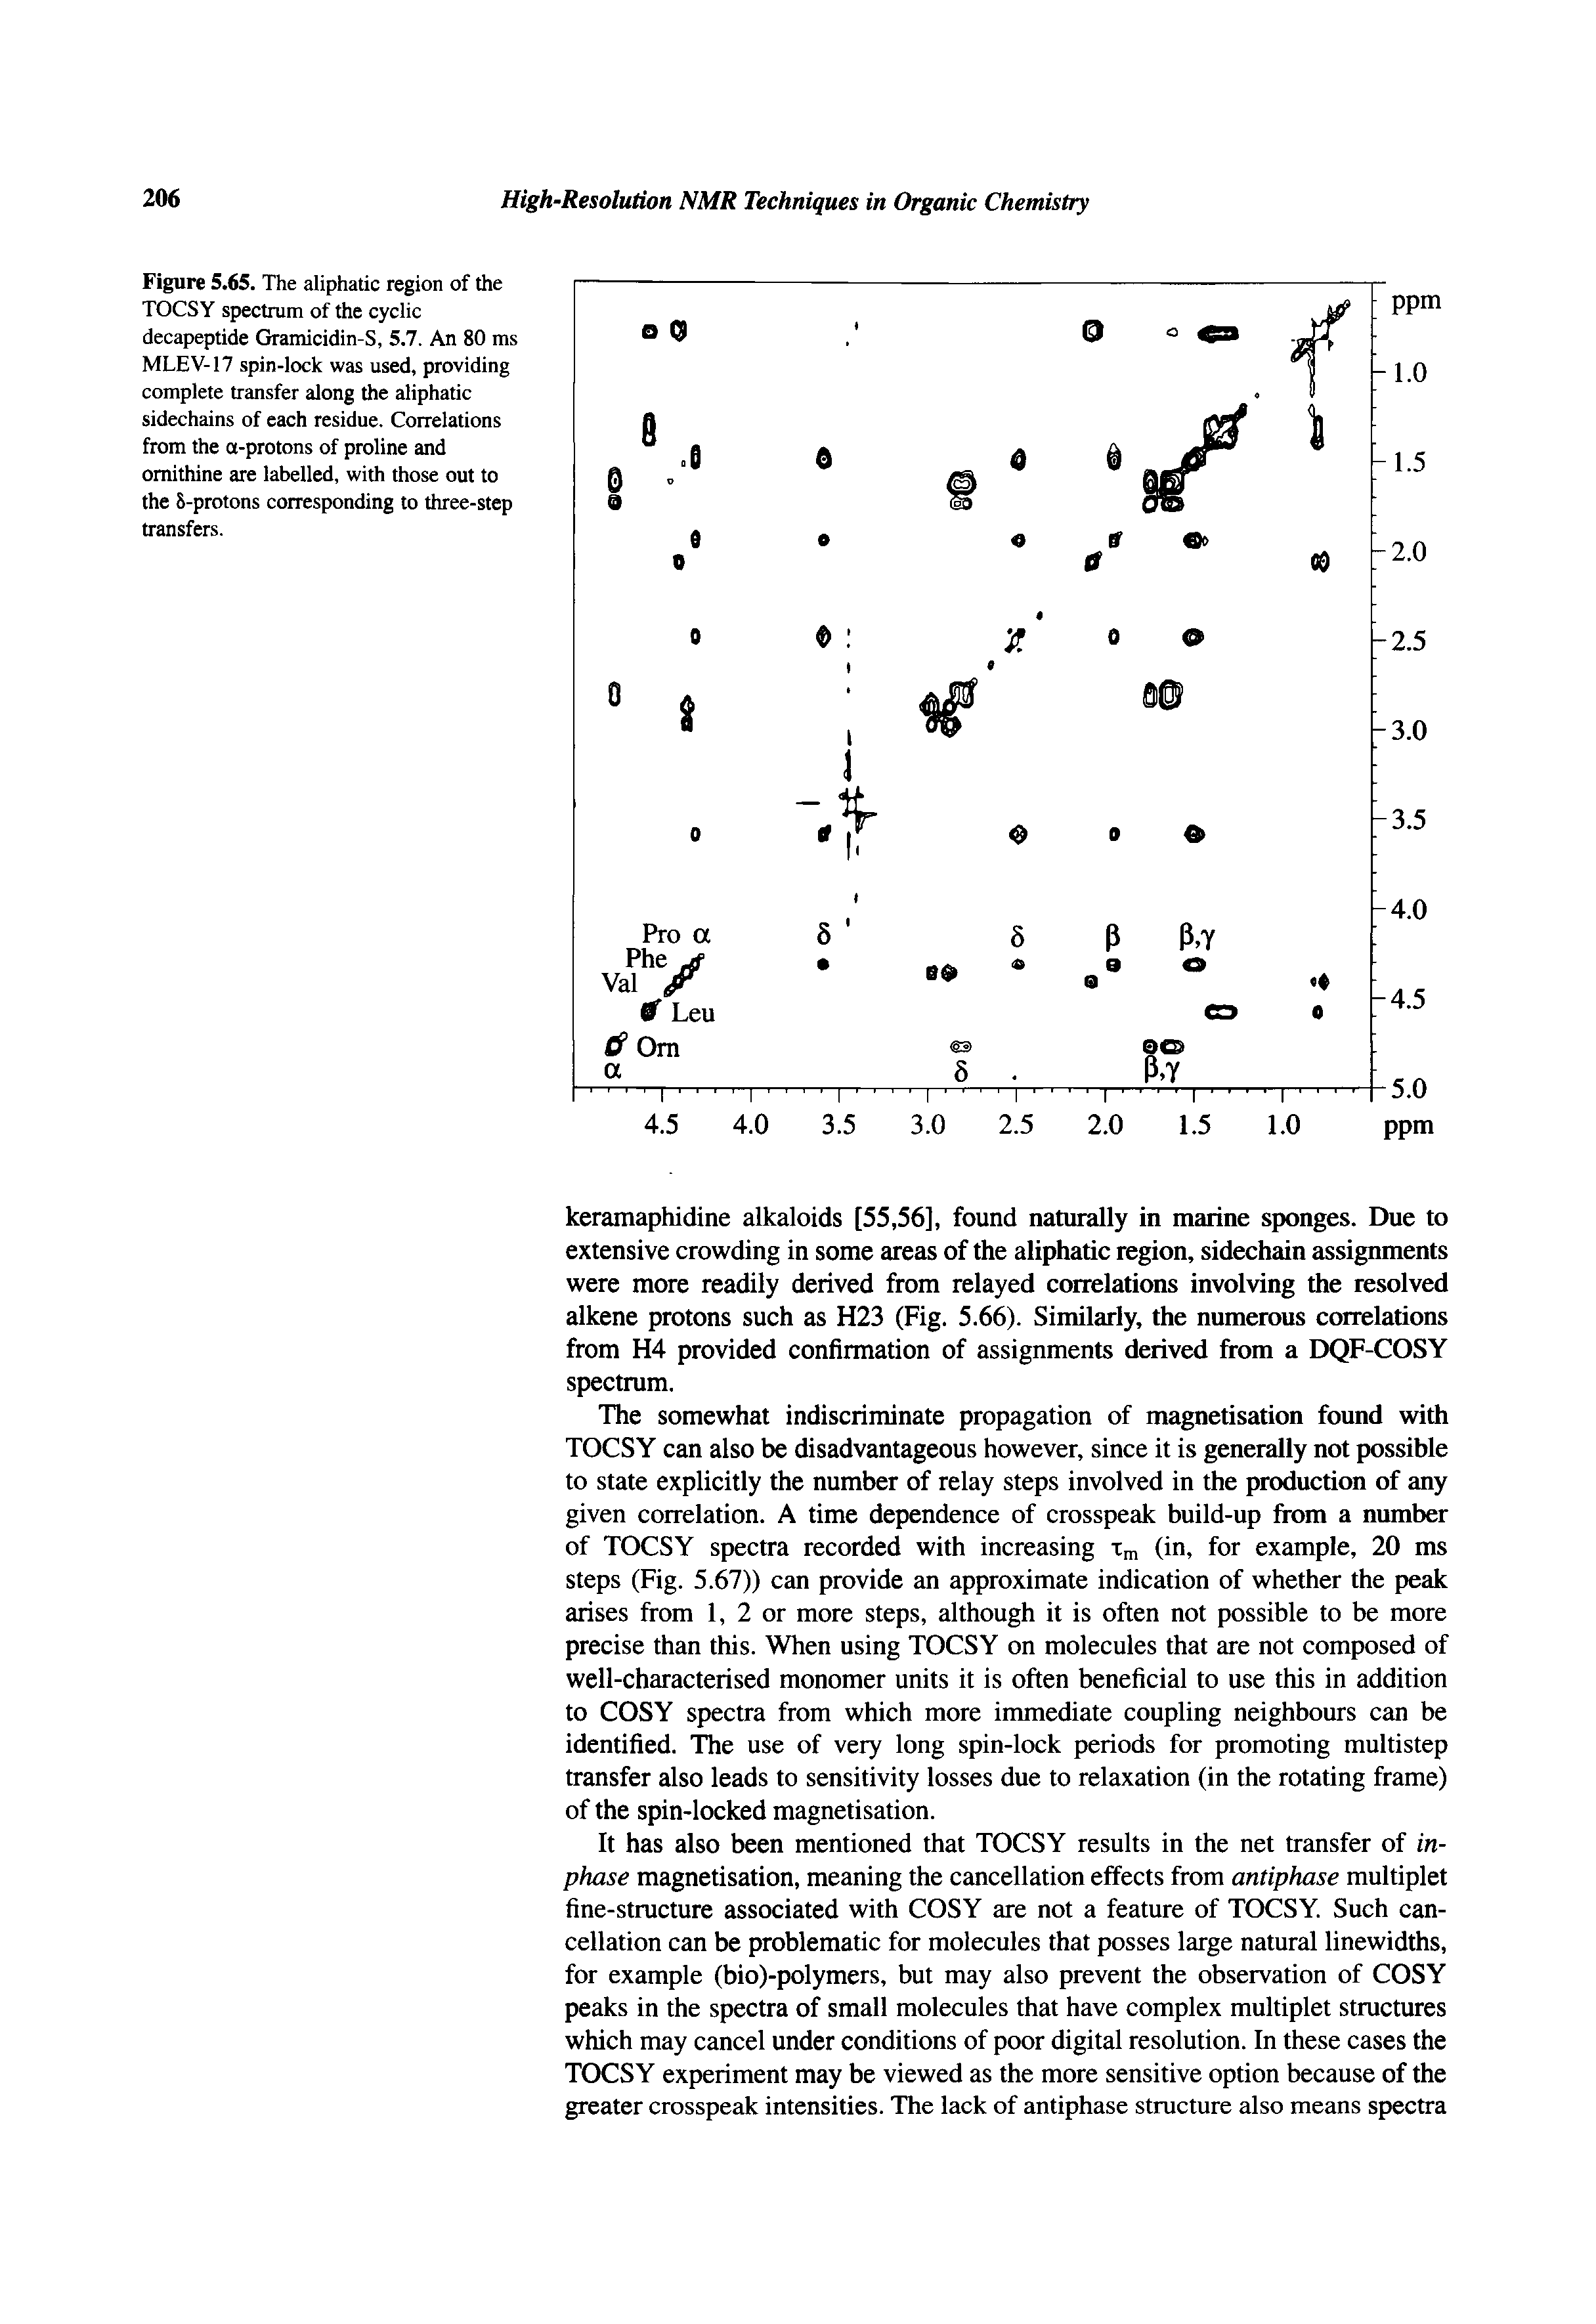 Figure 5.65. The aliphatic region of the TOCSY spectrum of the cyclic decapeptide Gramicidin-S, 5.7. An 80 ms MLEV-17 spin-lock was used, providing complete transfer along the aliphatic sidechains of each residue. Correlations from the a-protons of proline and ornithine are labelled, with those out to the S-protons corresponding to three-step transfers.